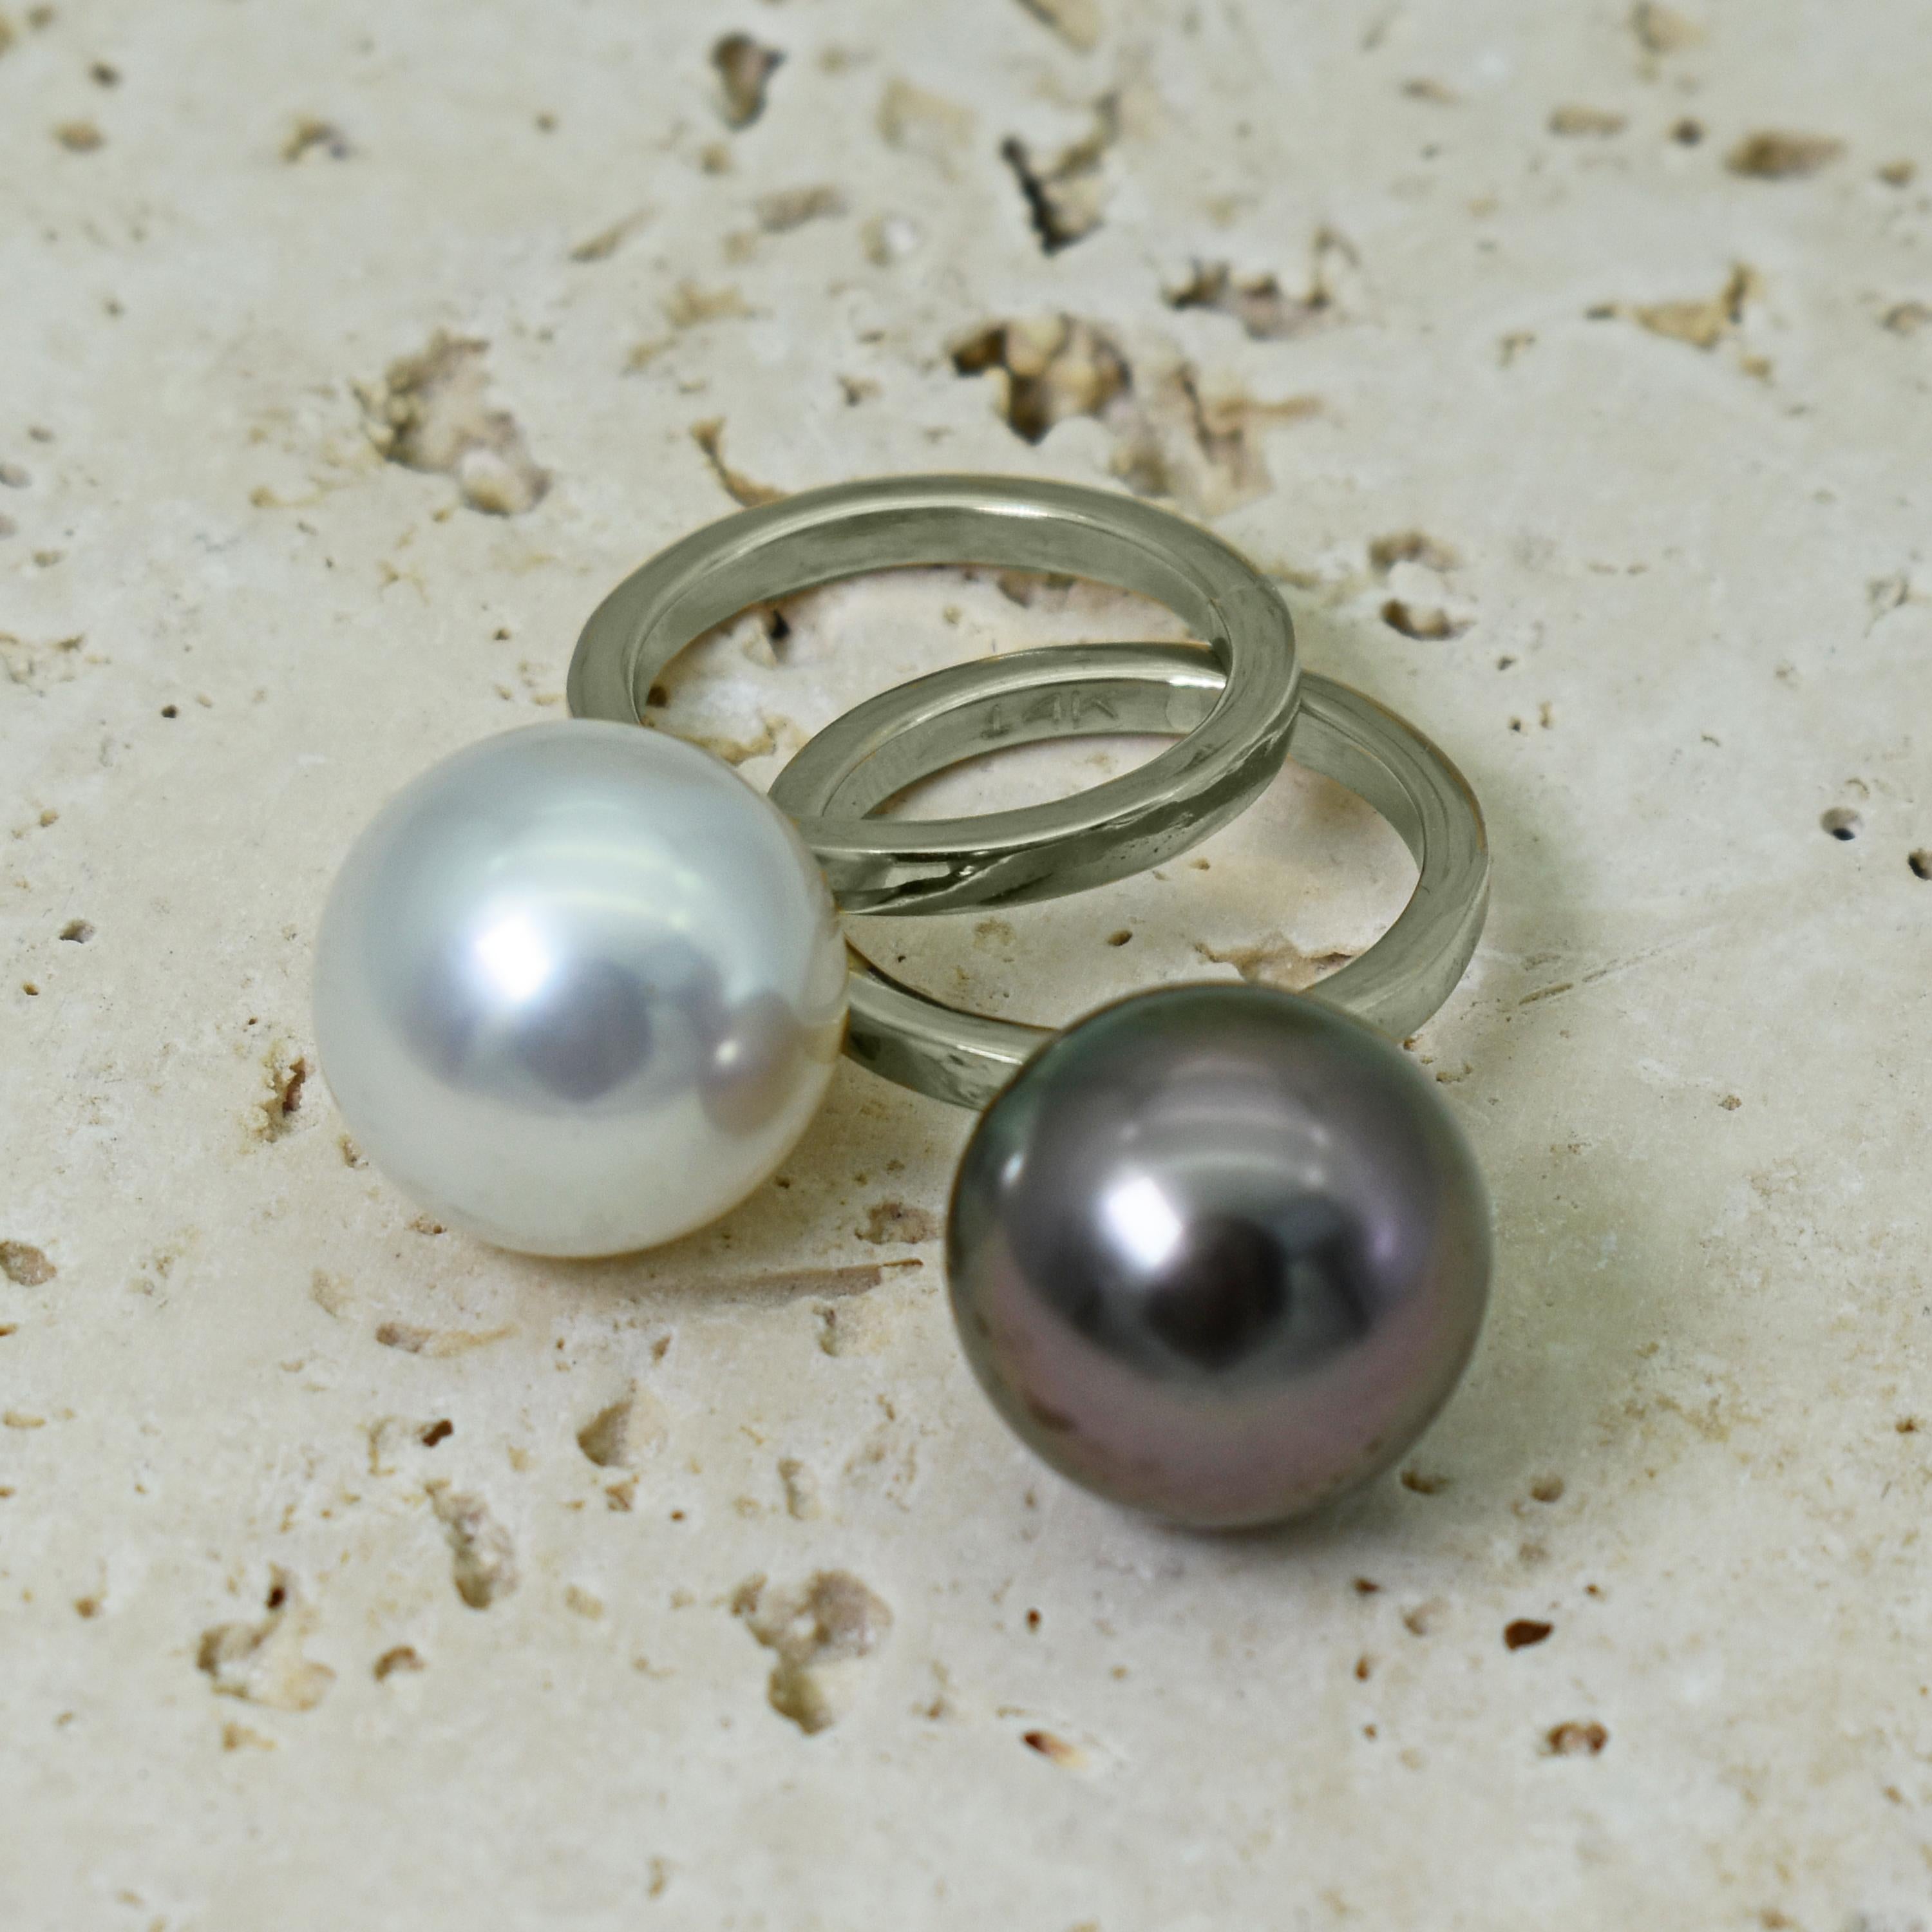 Round 15mm Tahitian and 15mm white Freshwater Pearl 14k white gold stackable rings. Rings are size 6. Can be worn individually or stacked with your other rings.